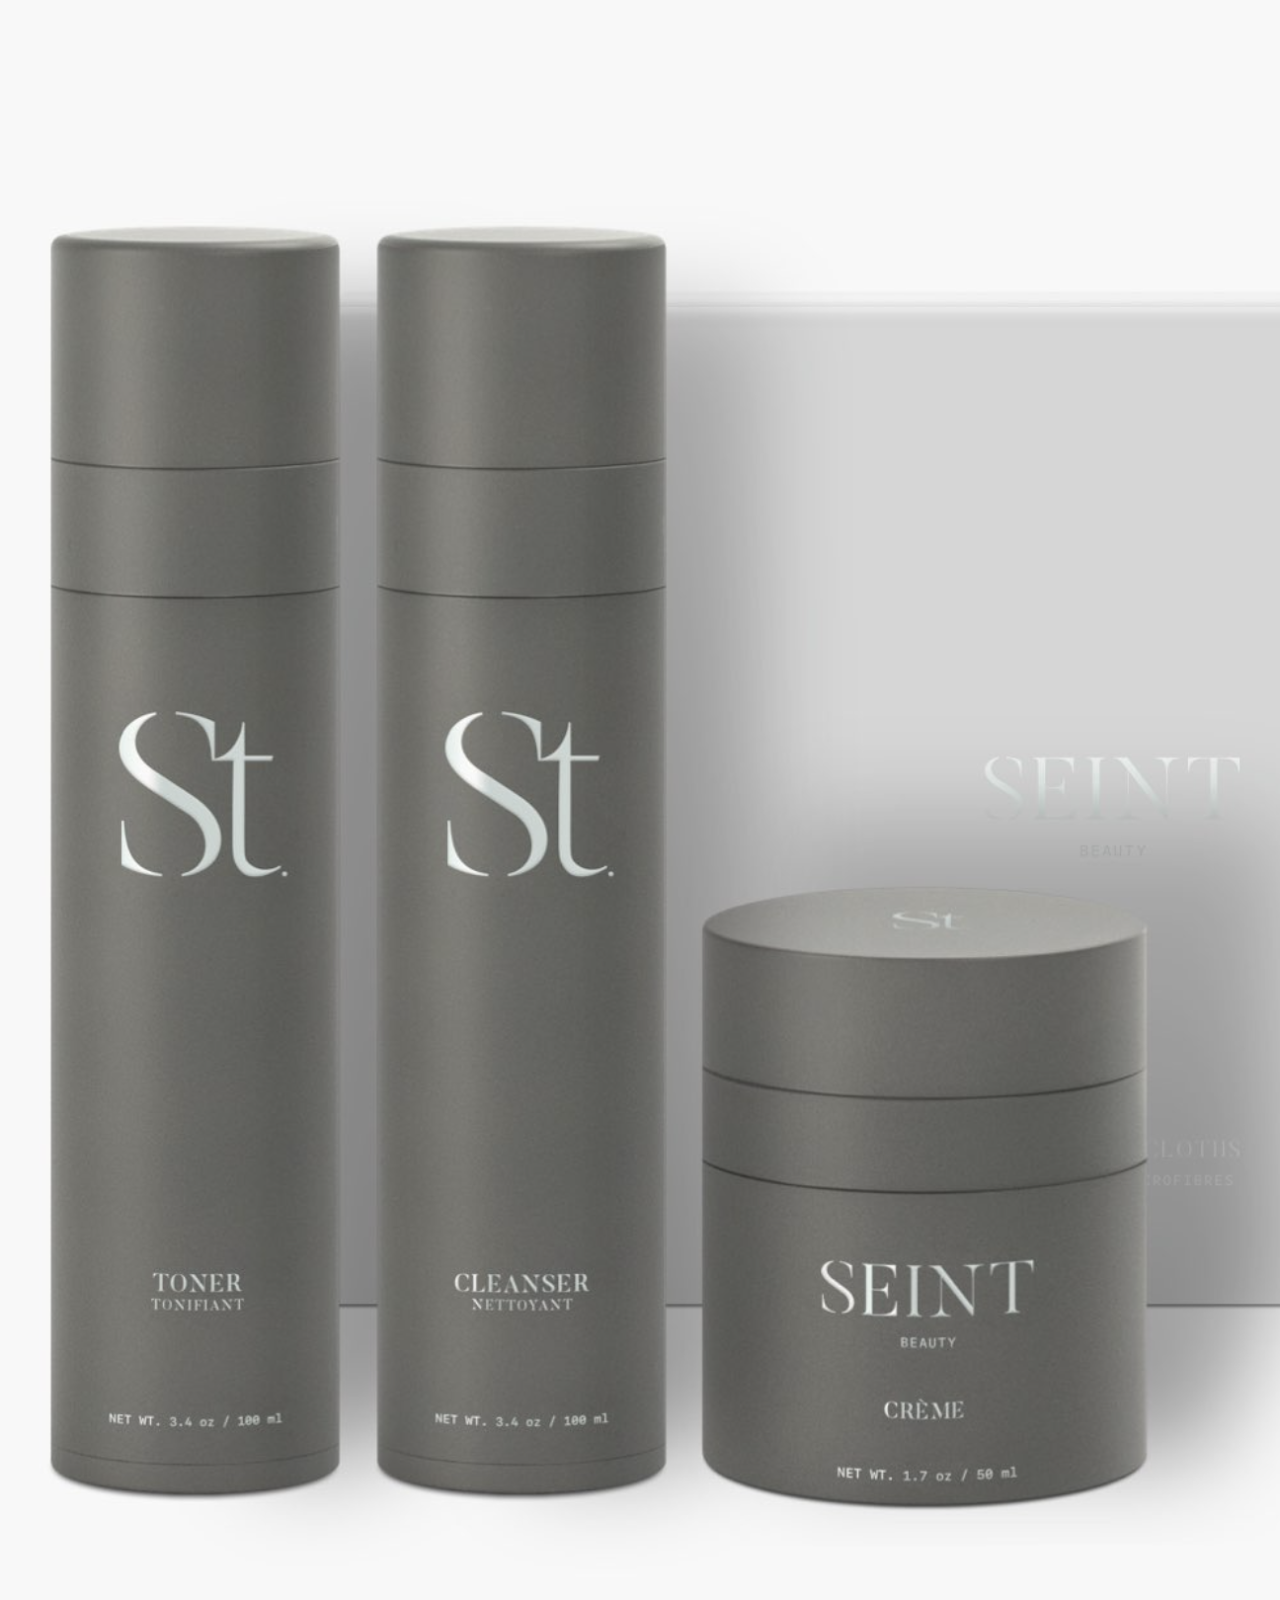 Seint's Hydrating skincare routine